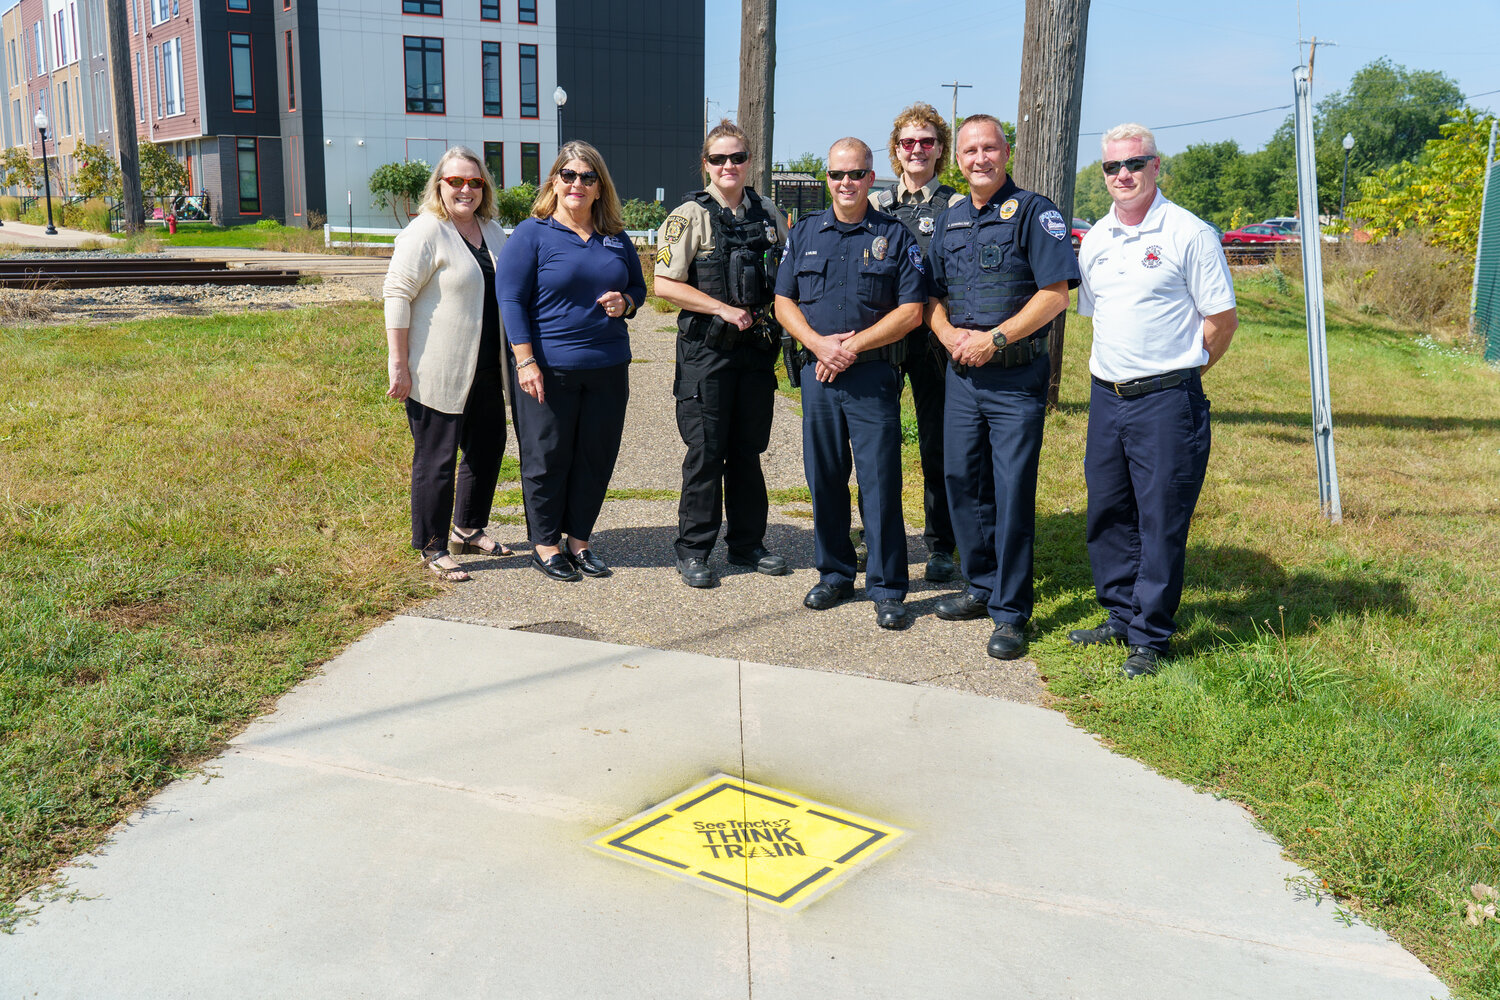 City of Hastings officials and CP Rail officials met to discuss Rail Safety Week and issues around keeping people safe near train tracks. Left to Right: City Attorney Kelly Murtaugh, Mayor Mary Fasbender, Sergeant Micki Mair, Chief David Wilske, Detective CPKC Railroad Police Tracy Bergerson, Deputy Chief Bryan Schowalter and Fire Chief John Townsend.